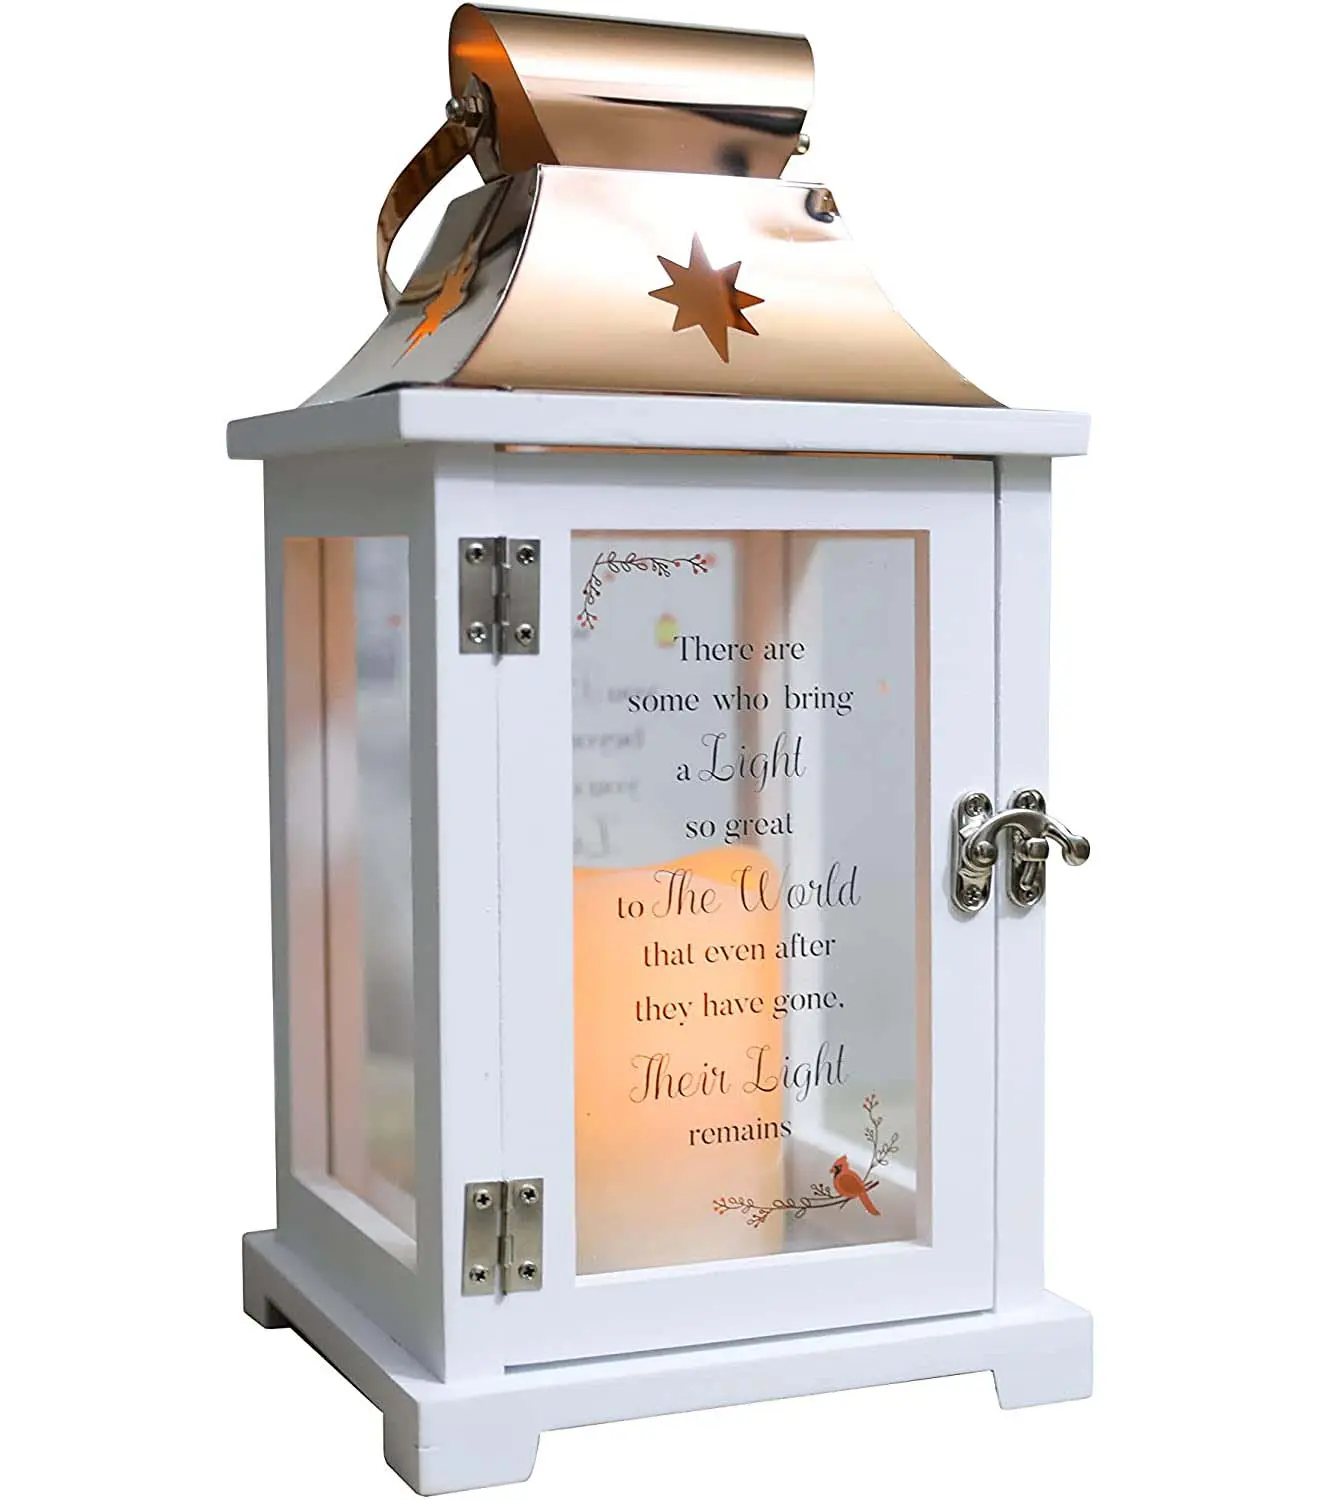 Hotsell Vintage Wooden Memorial Lantern Decorative With Flickering LED Candle for Loss of Loved One